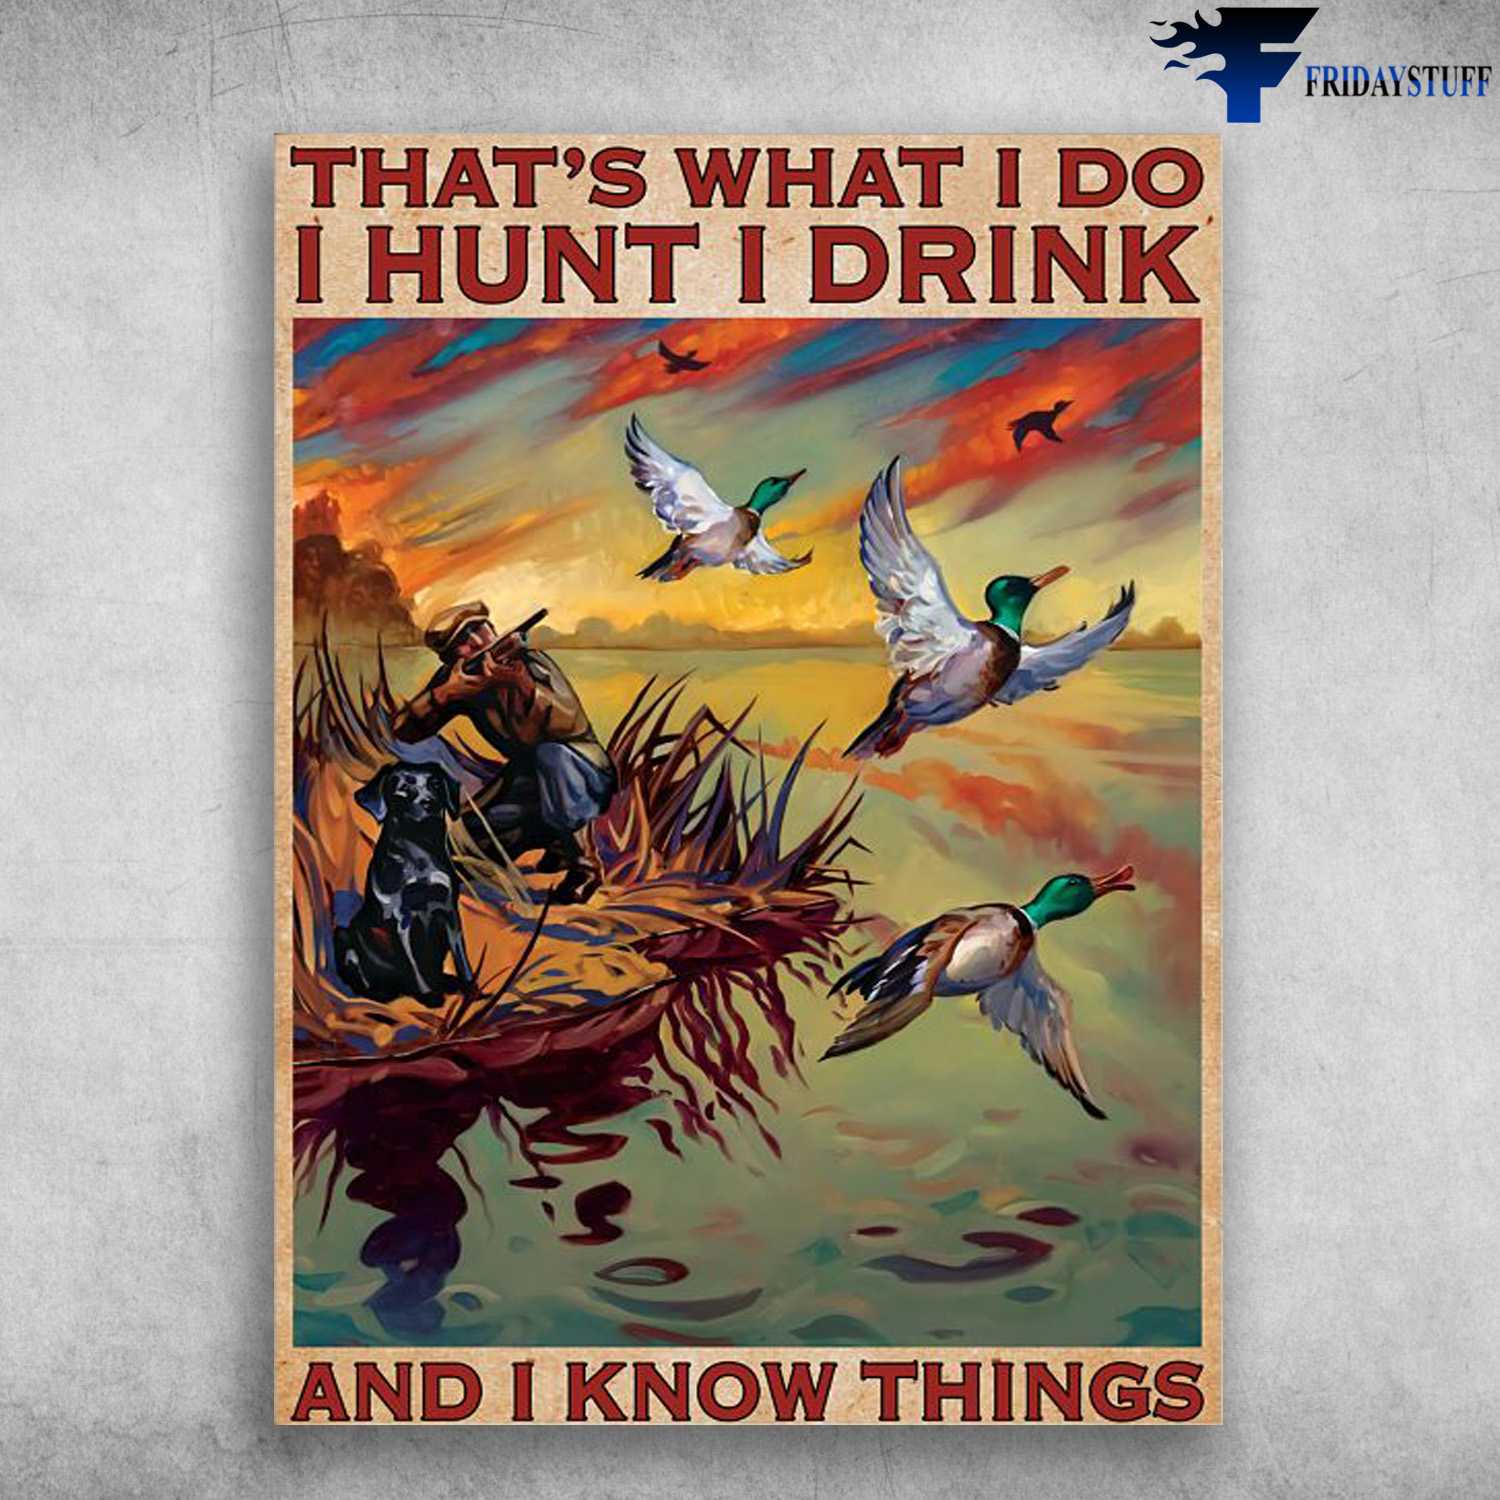 Duck Hunting, Hunting With Dog, That's What I Do, I Hunt, I Drink, And I Know Things